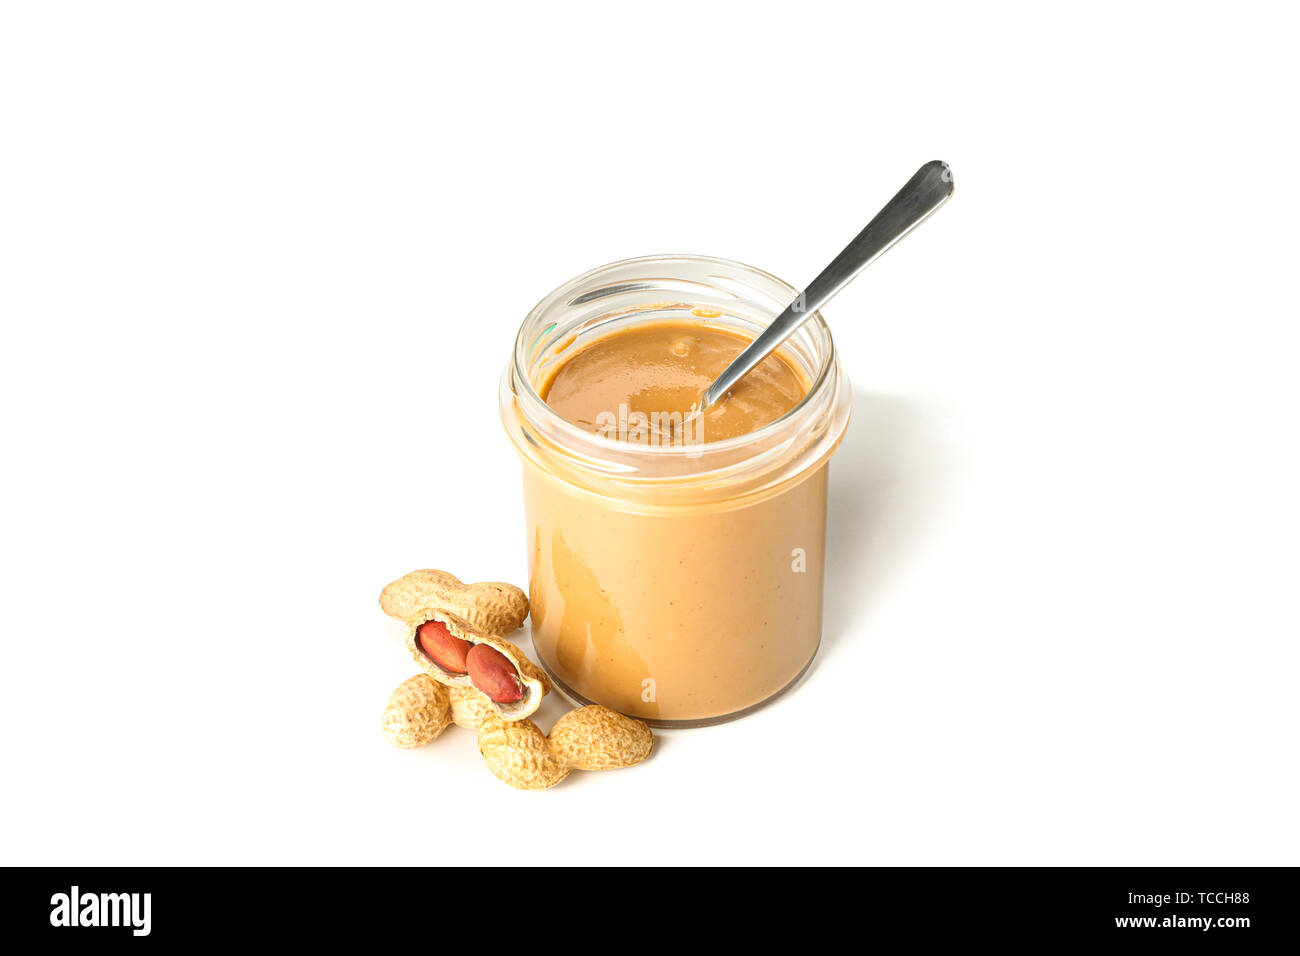 Peanut Butter Jar and Knife Stock Image - Image of small, food: 136329097